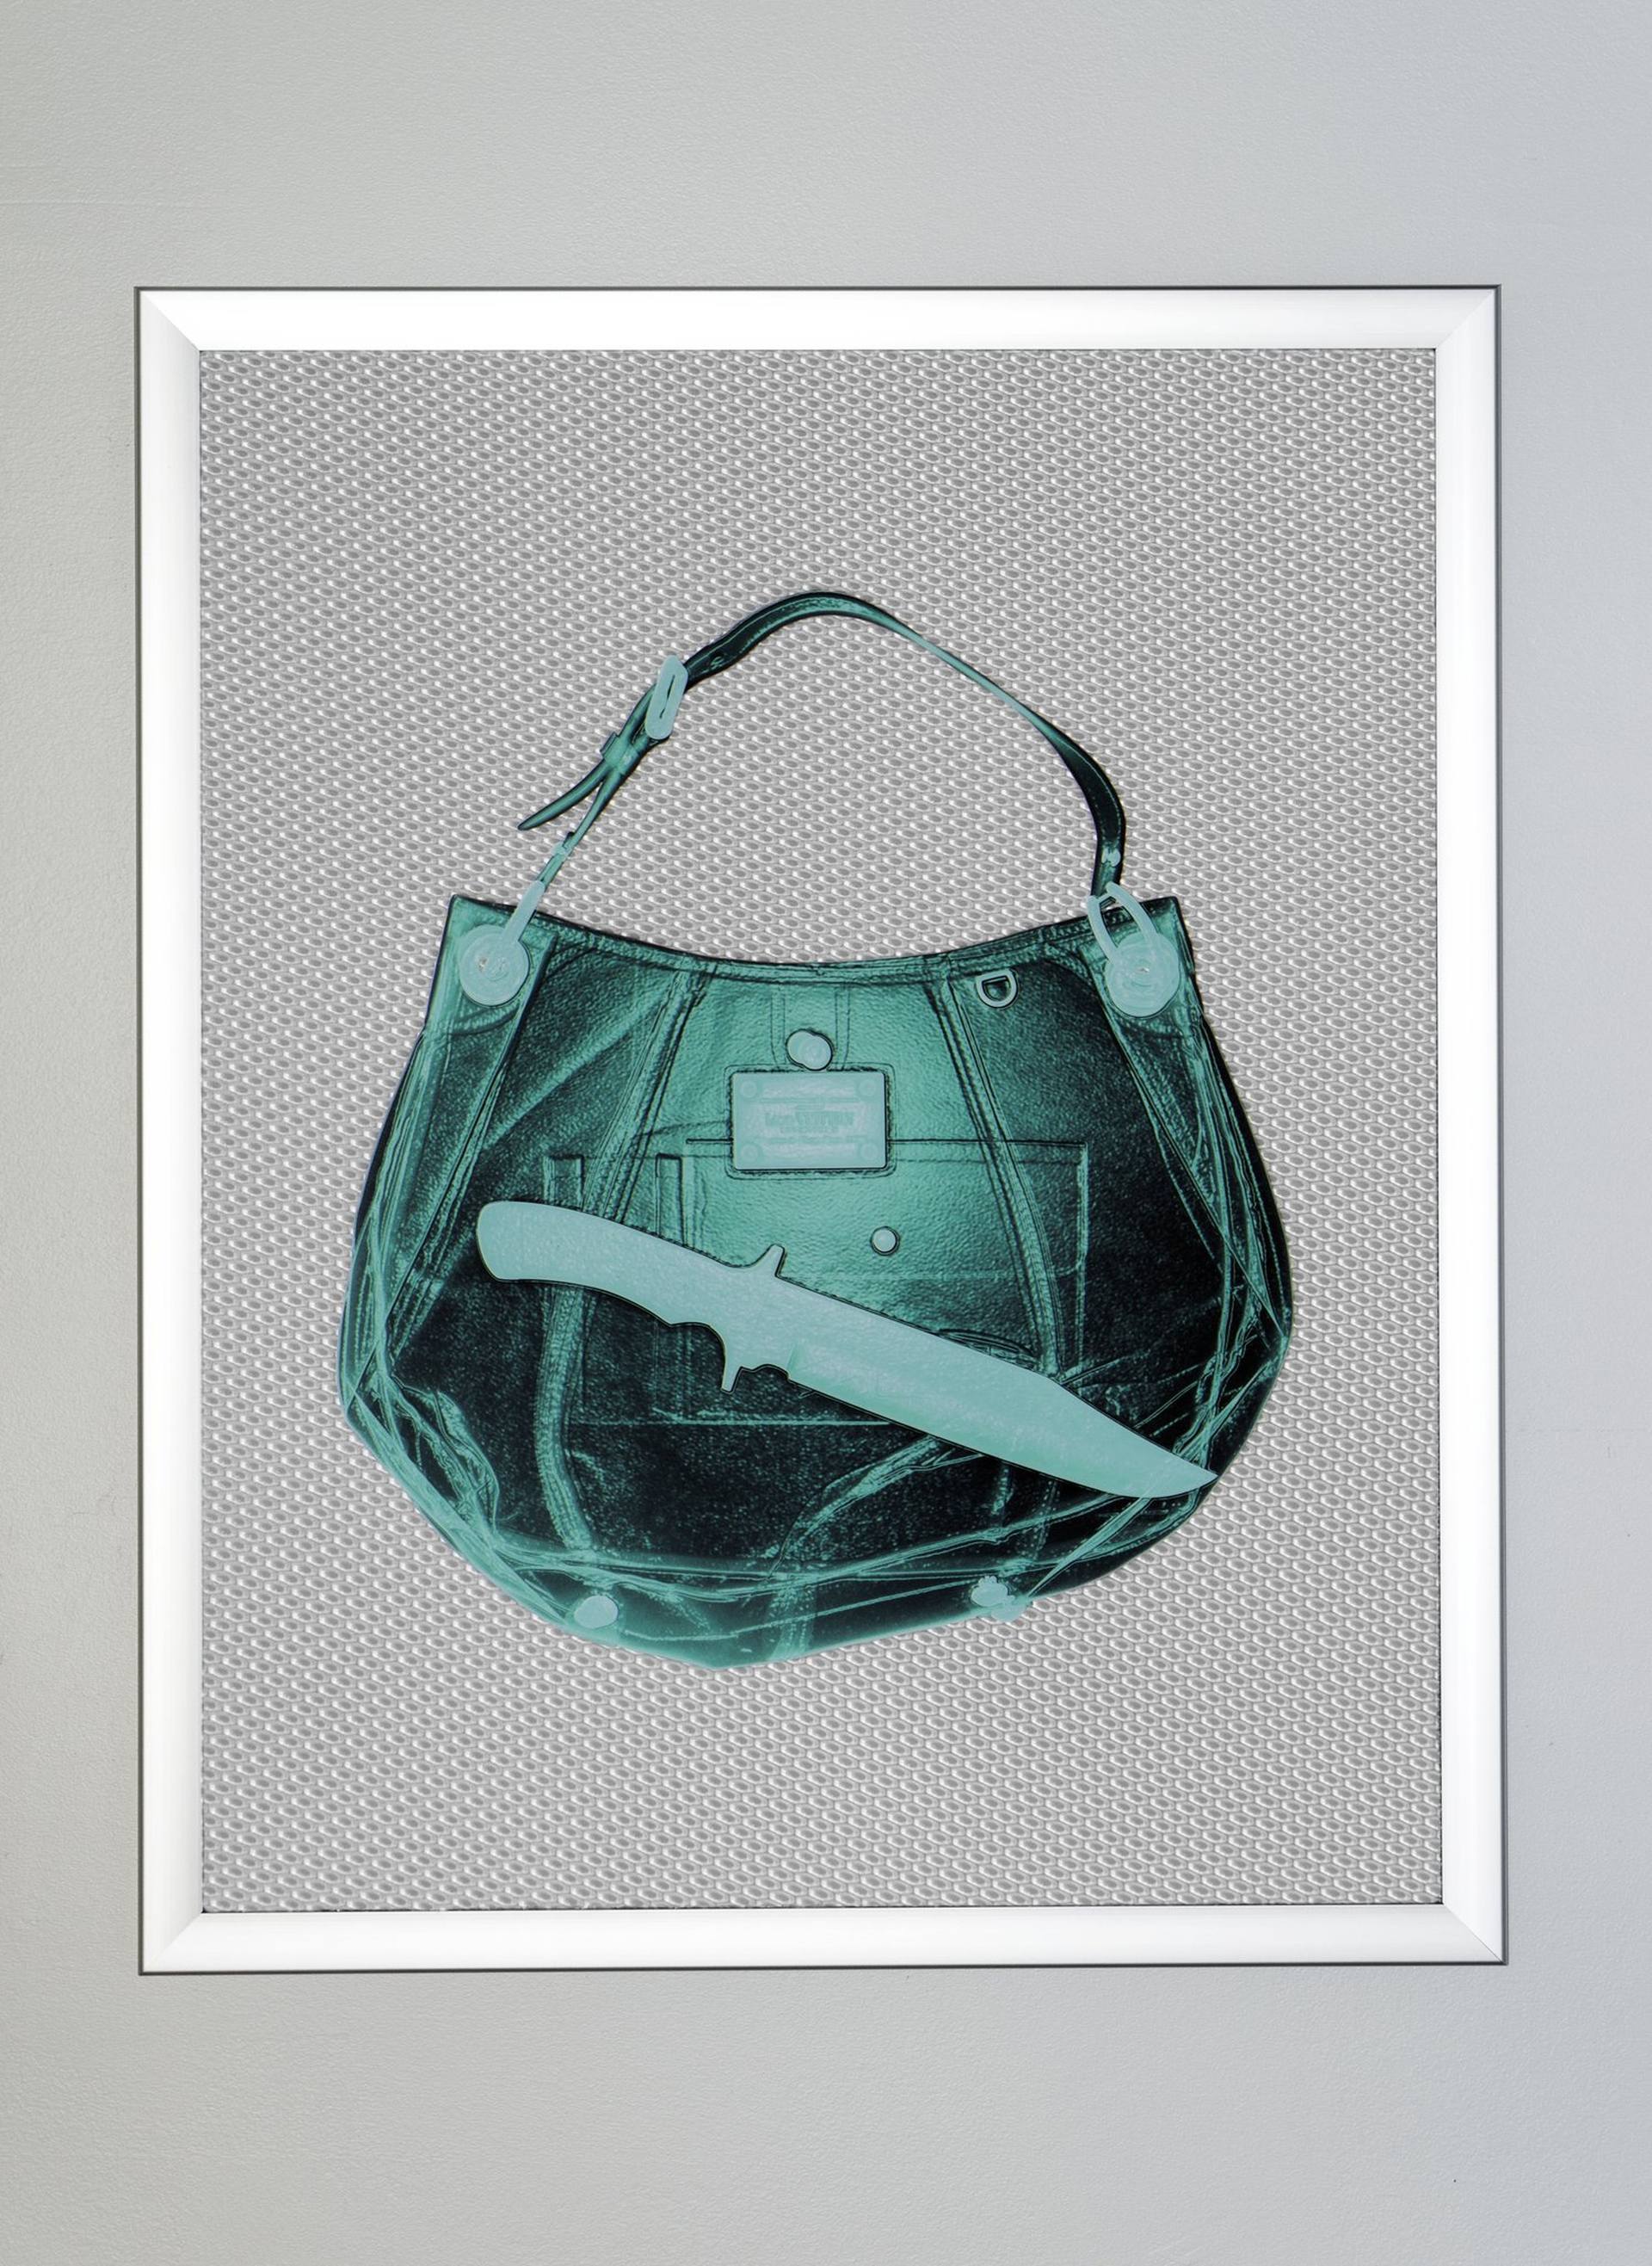 Turquoise Louis Vuitton Handbag With Knife Photography by Blazo Kovacevic